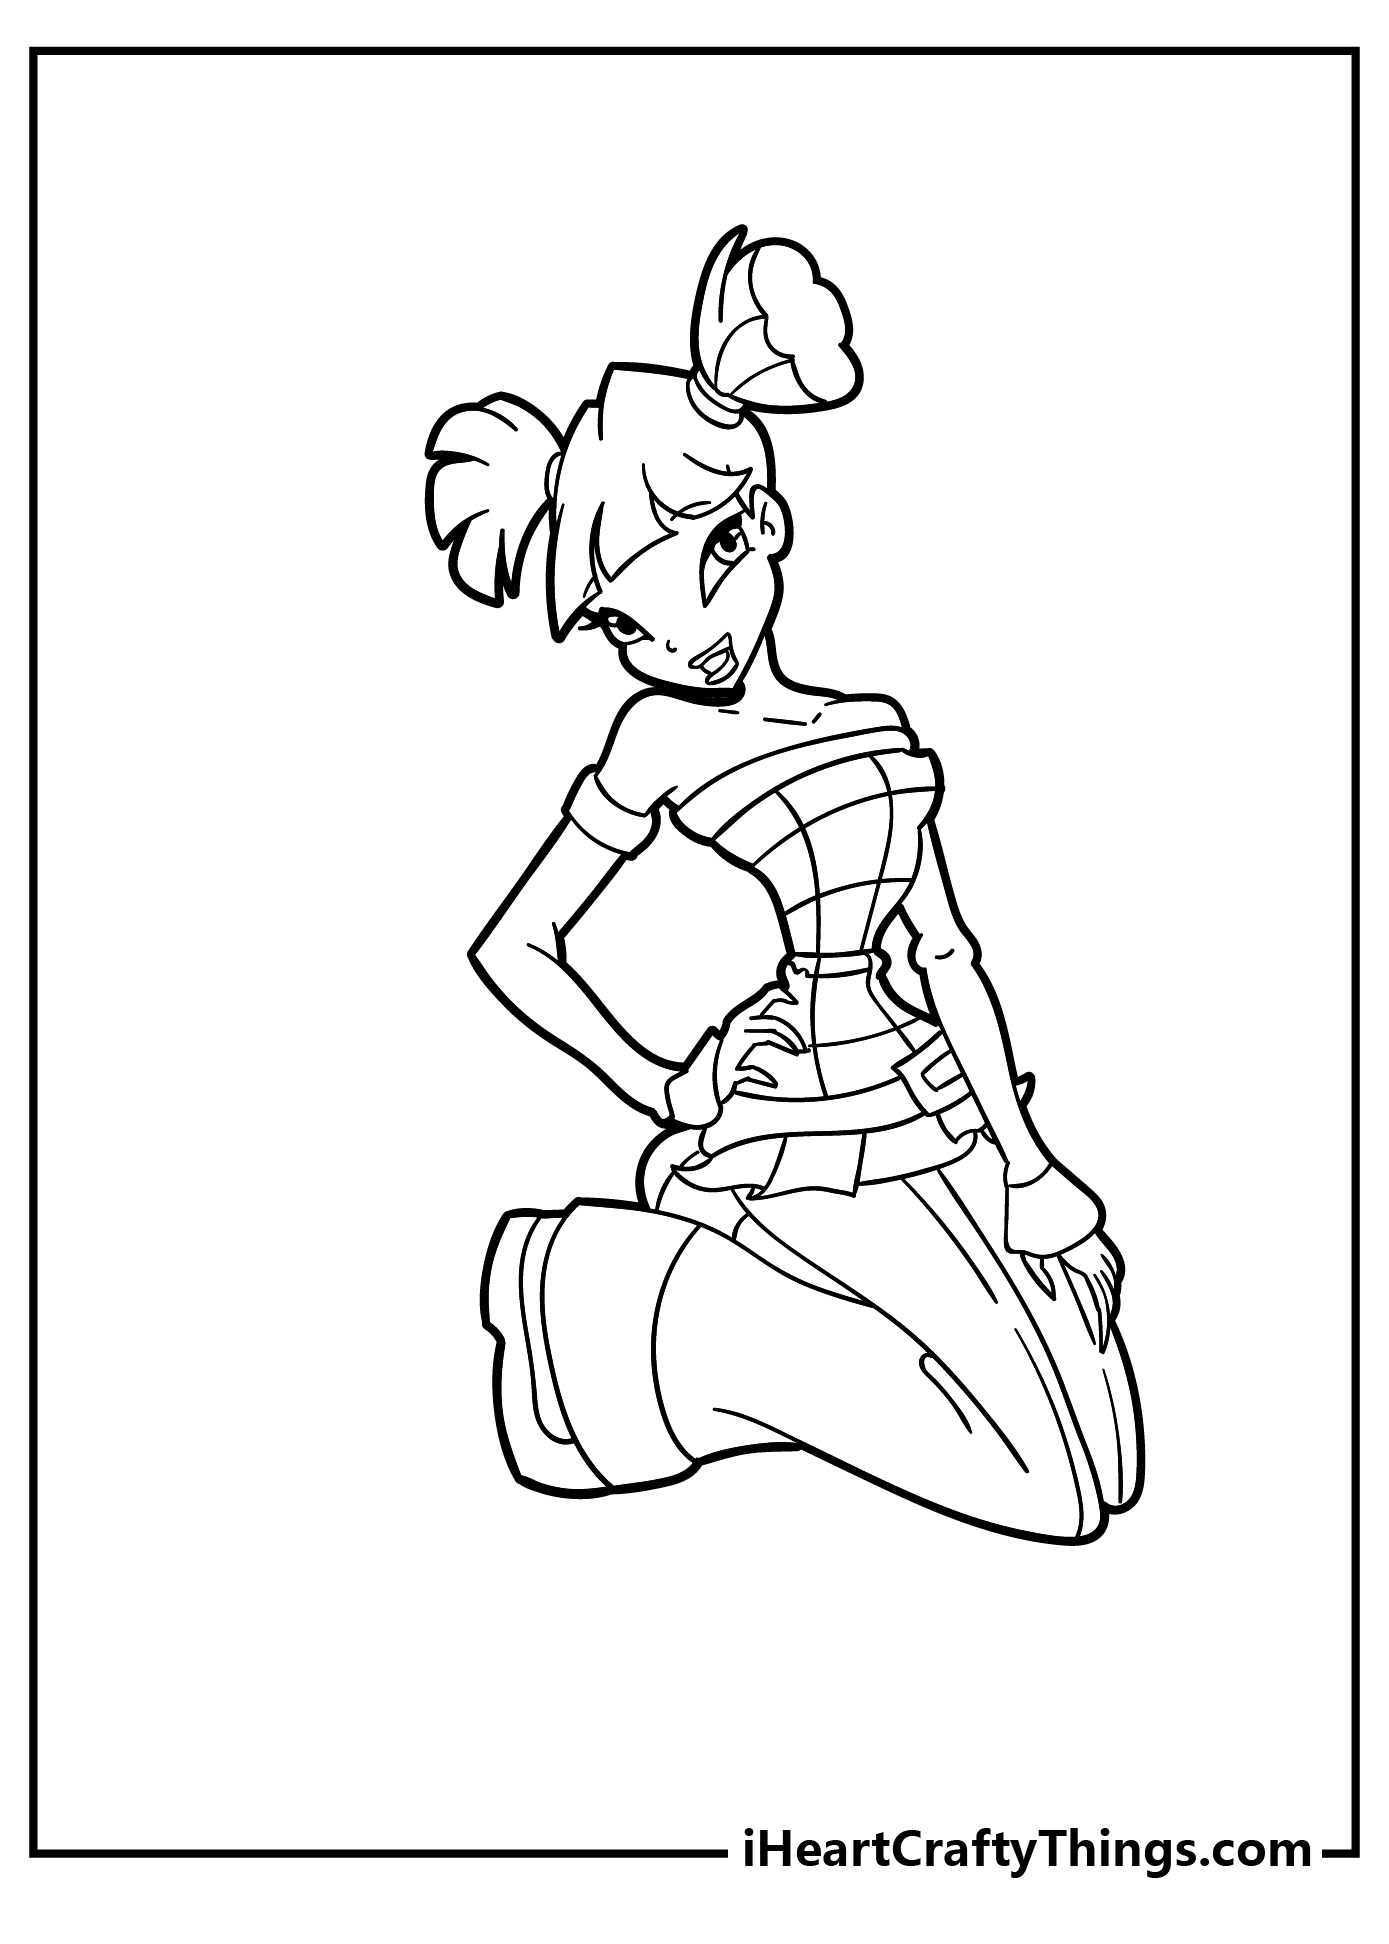 Winx Coloring Sheet for children free download